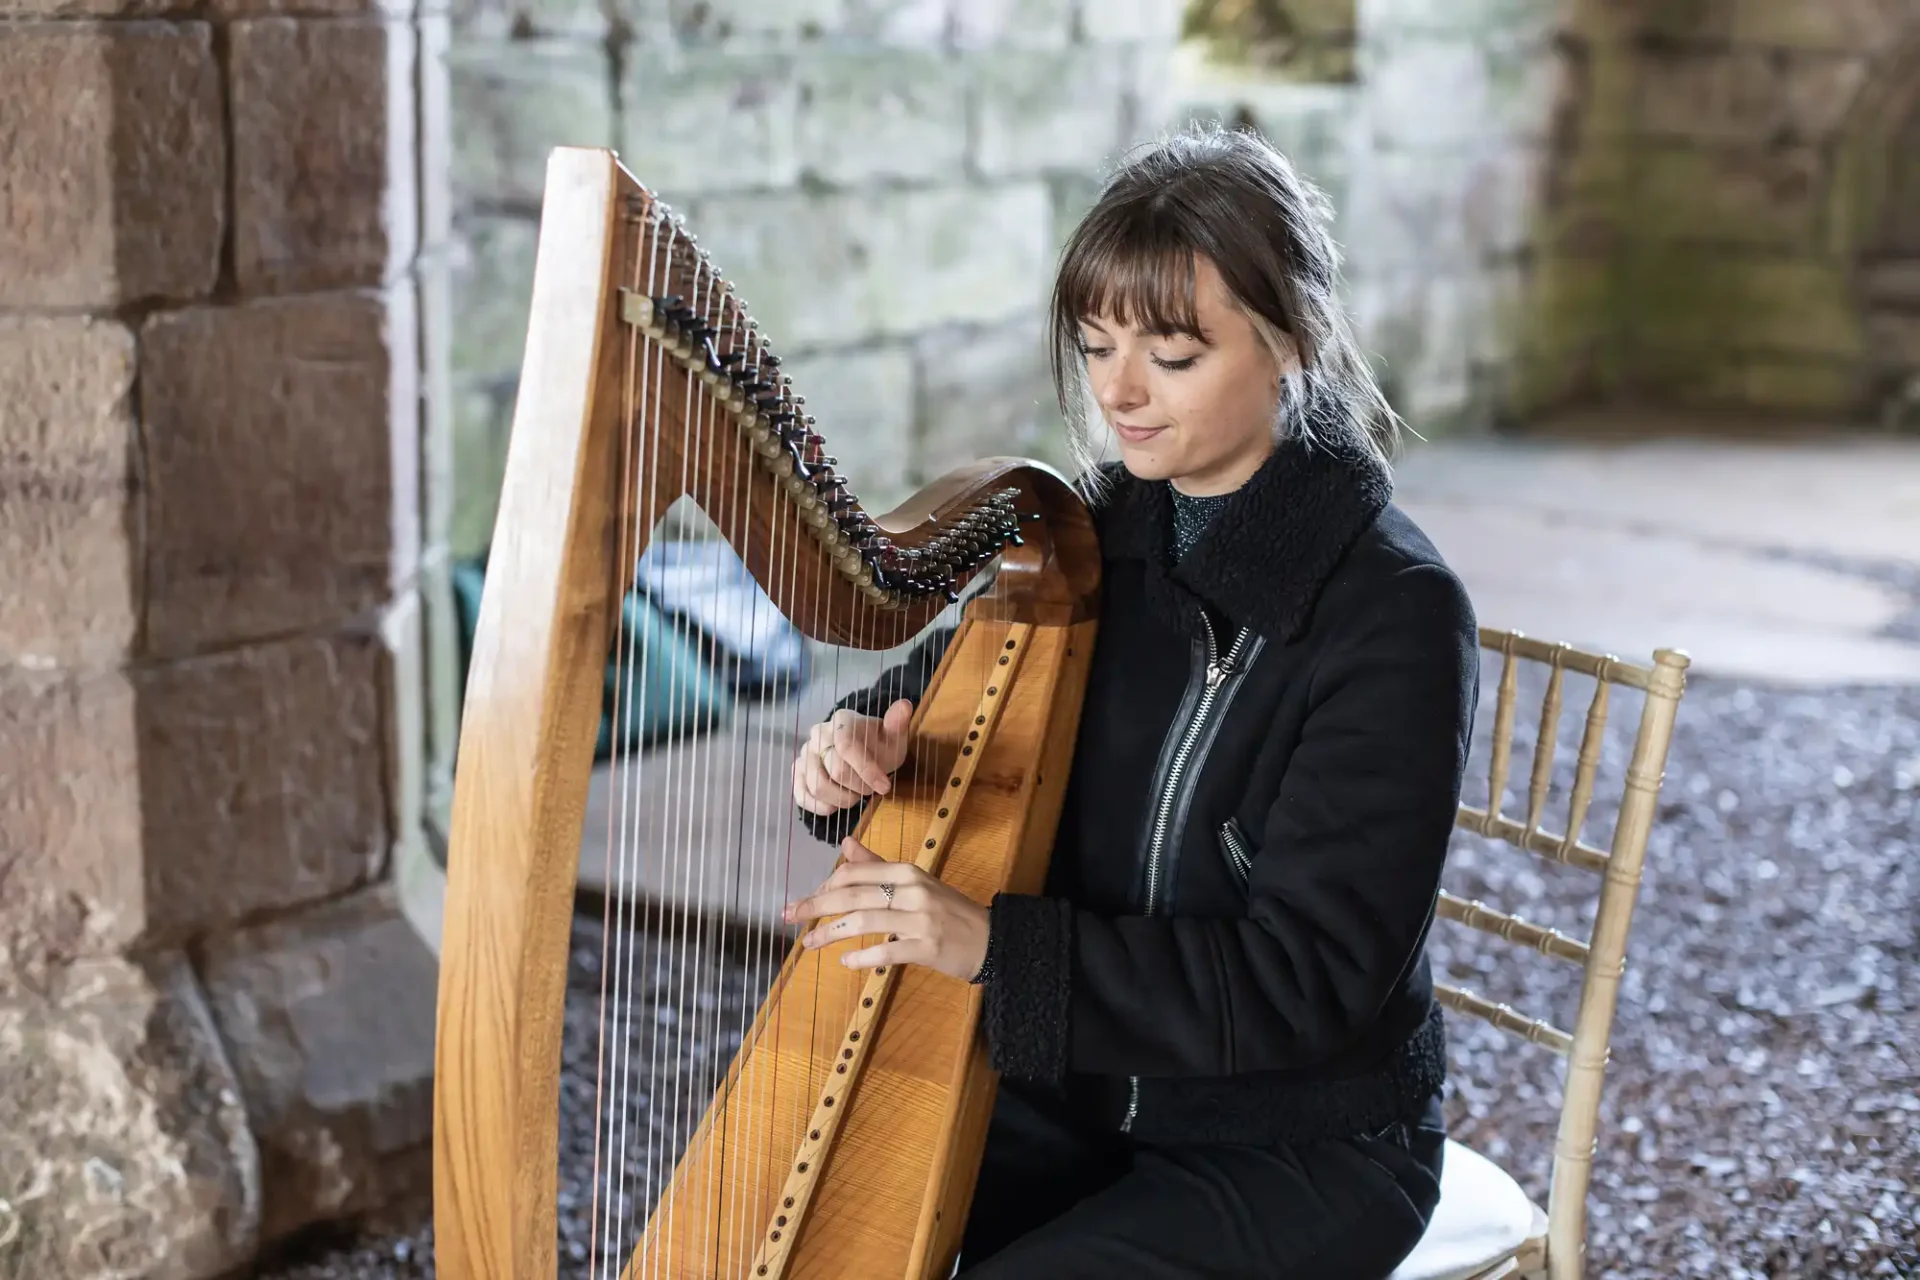 A woman sits on a wooden chair playing a harp, with stone walls in the background.